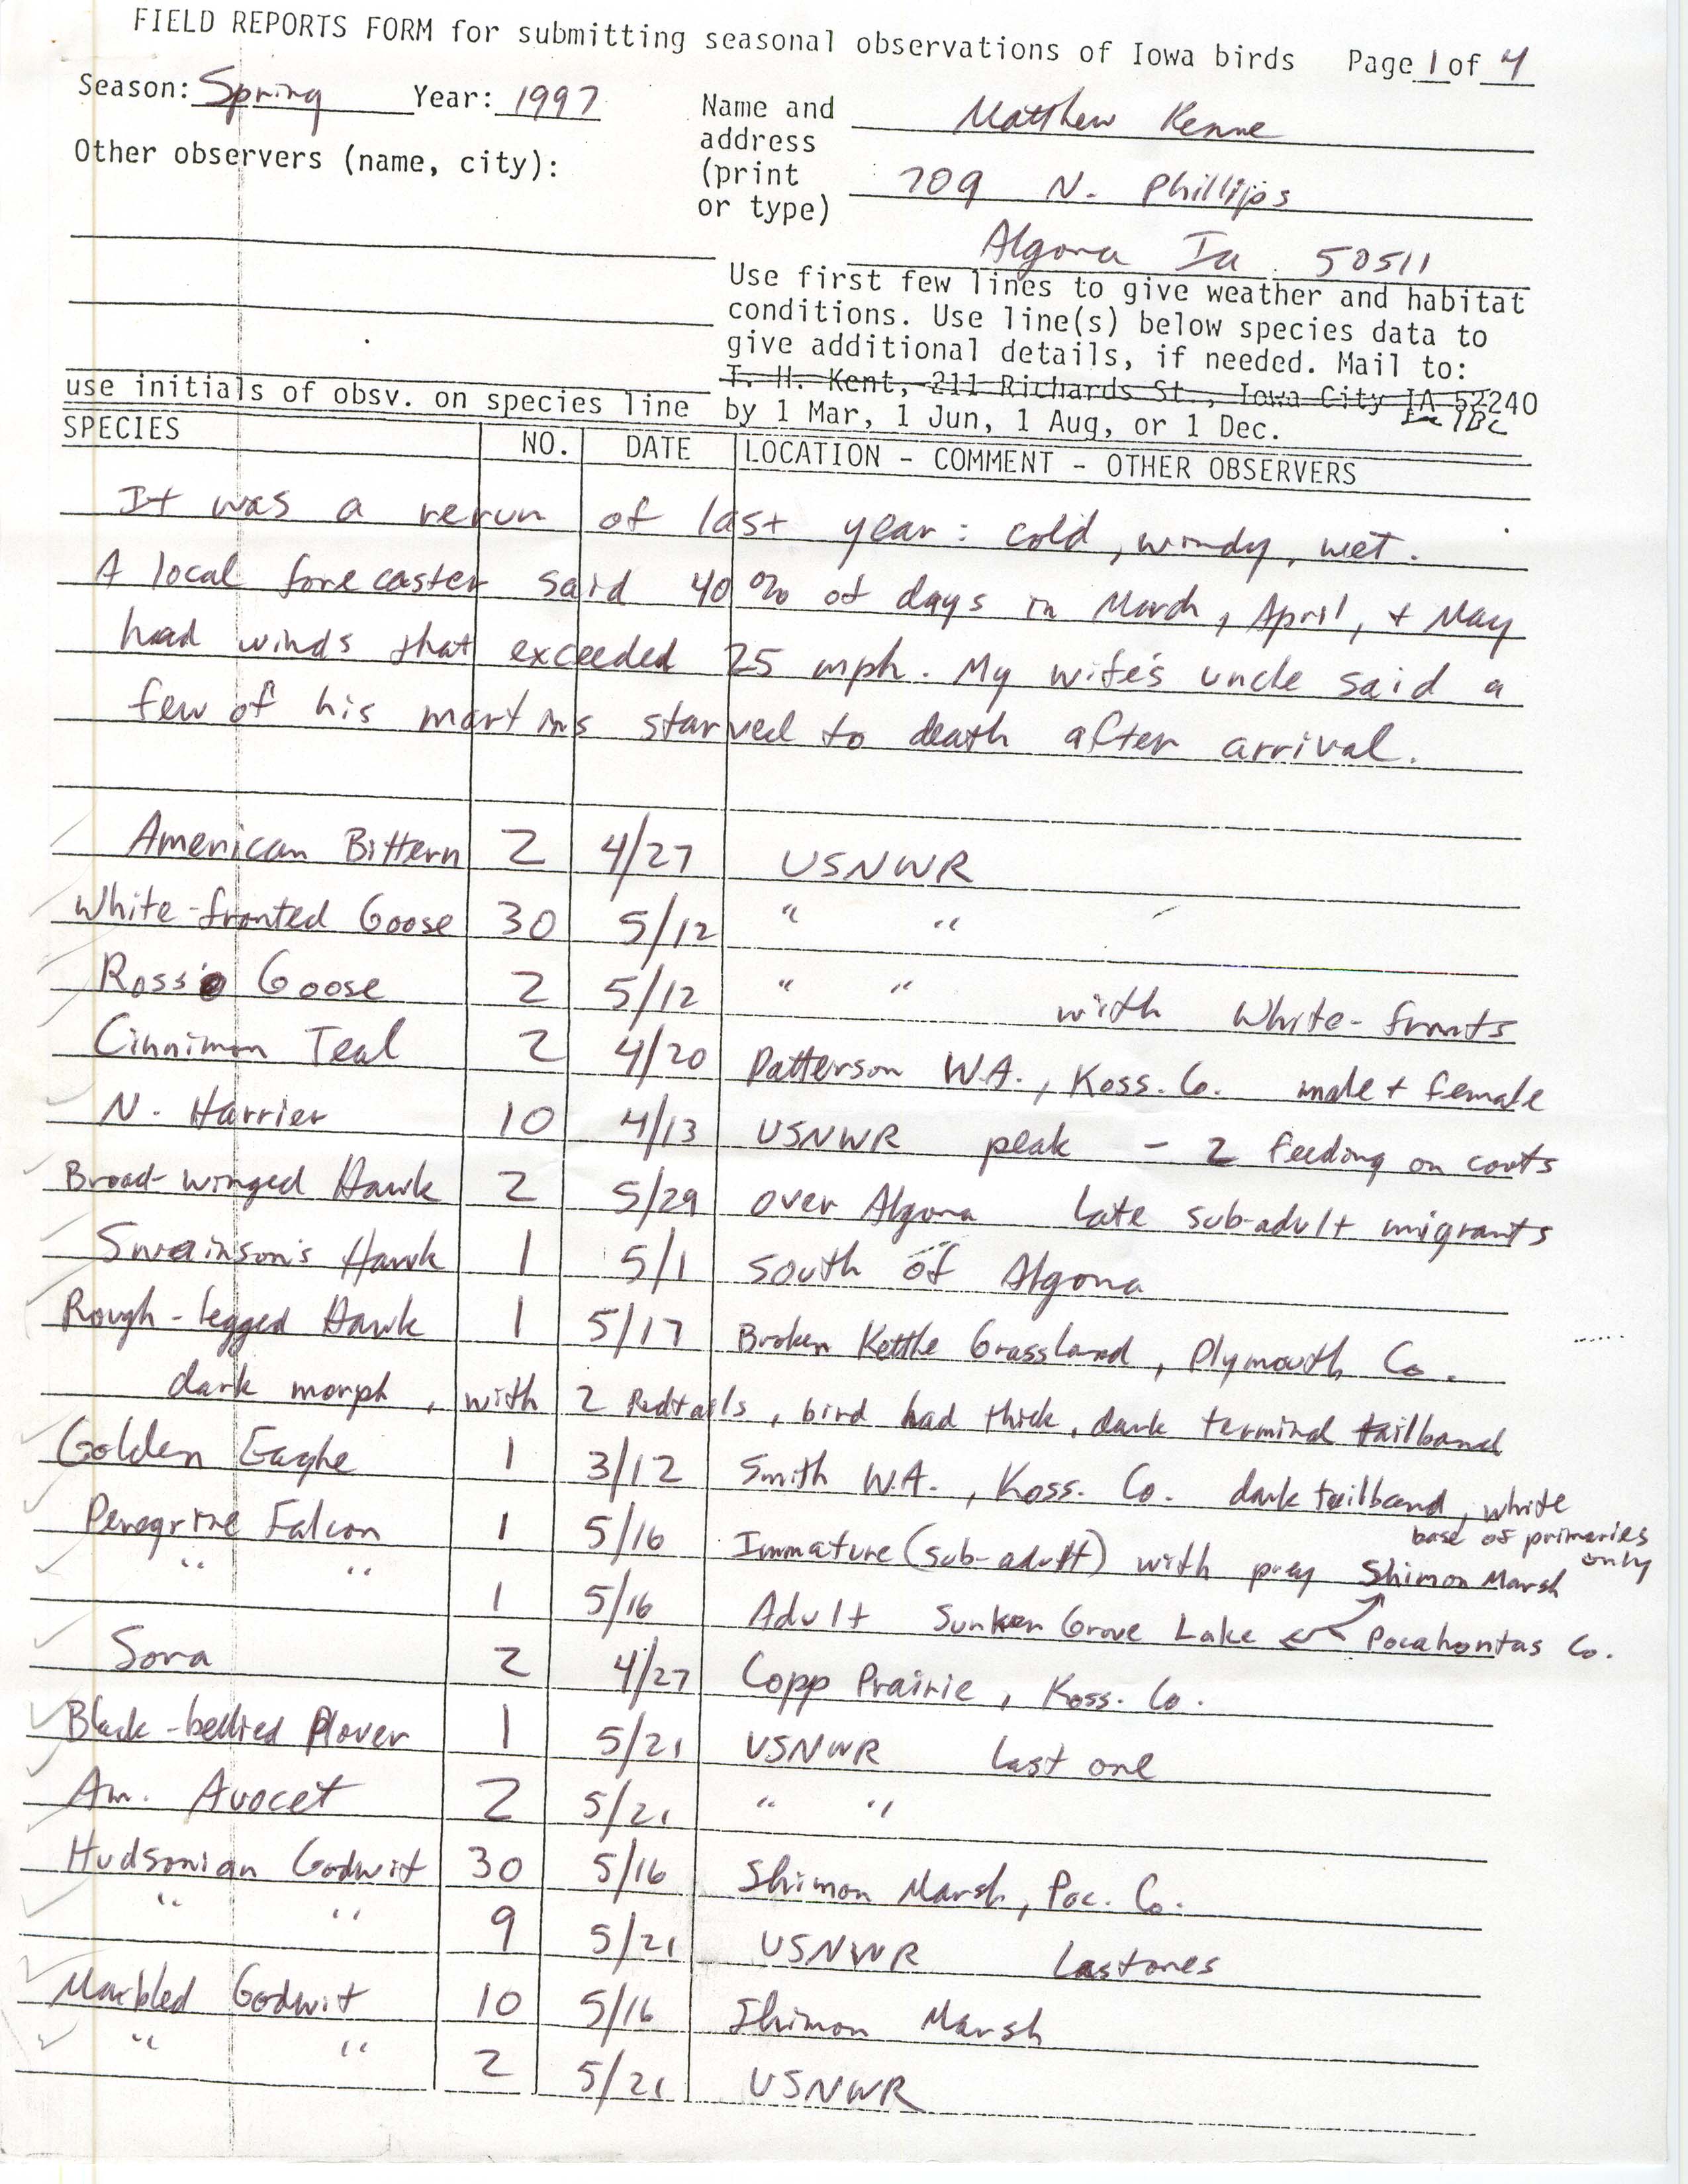 Field reports form for submitting seasonal observations of Iowa birds, Matthew Kenne, spring 1997